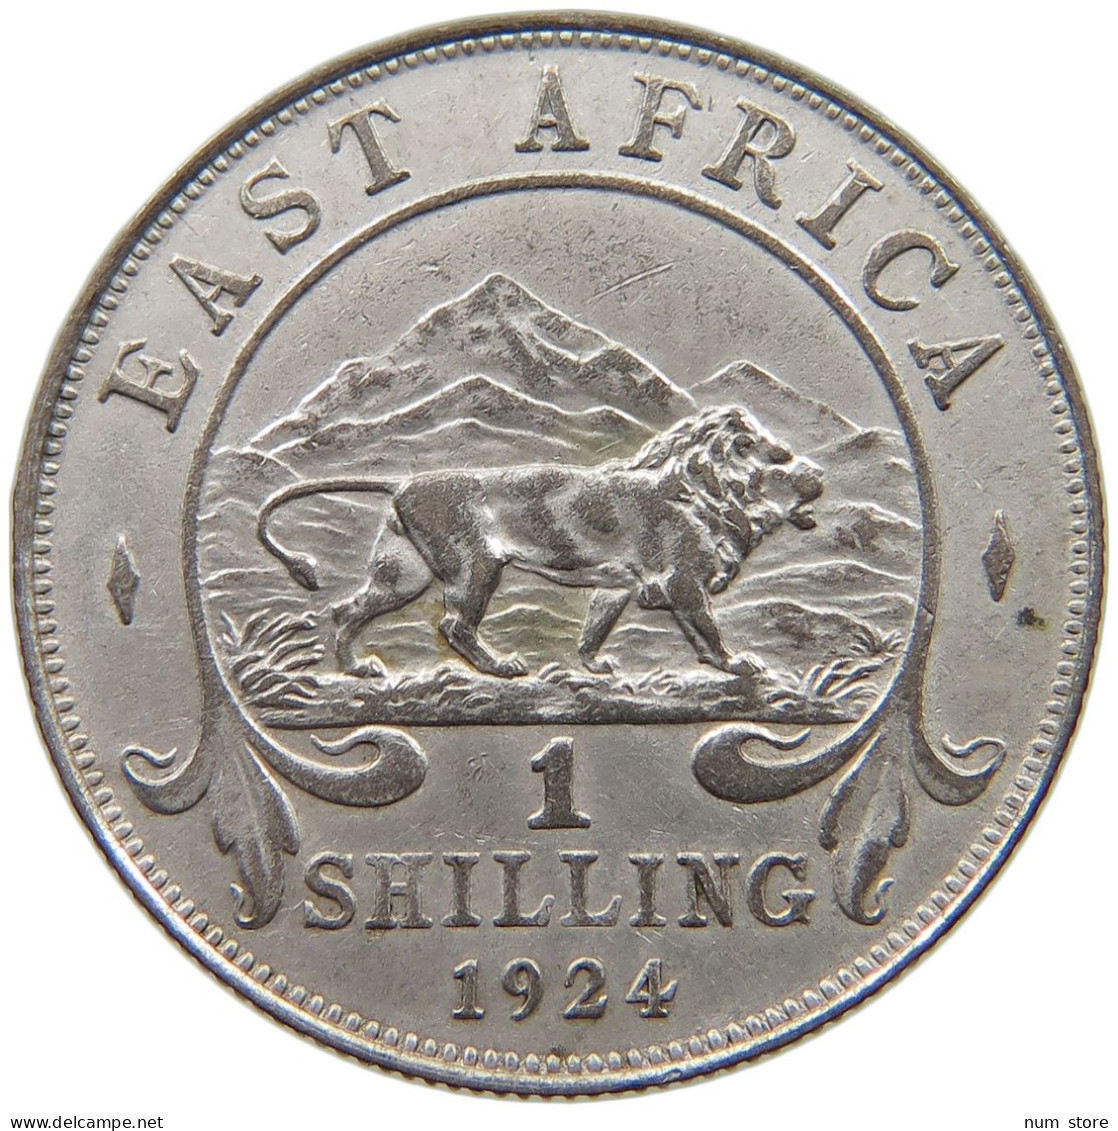 EAST AFRICA SHILLING 1924 GEORGE V. #MA 020905 - Colonia Británica